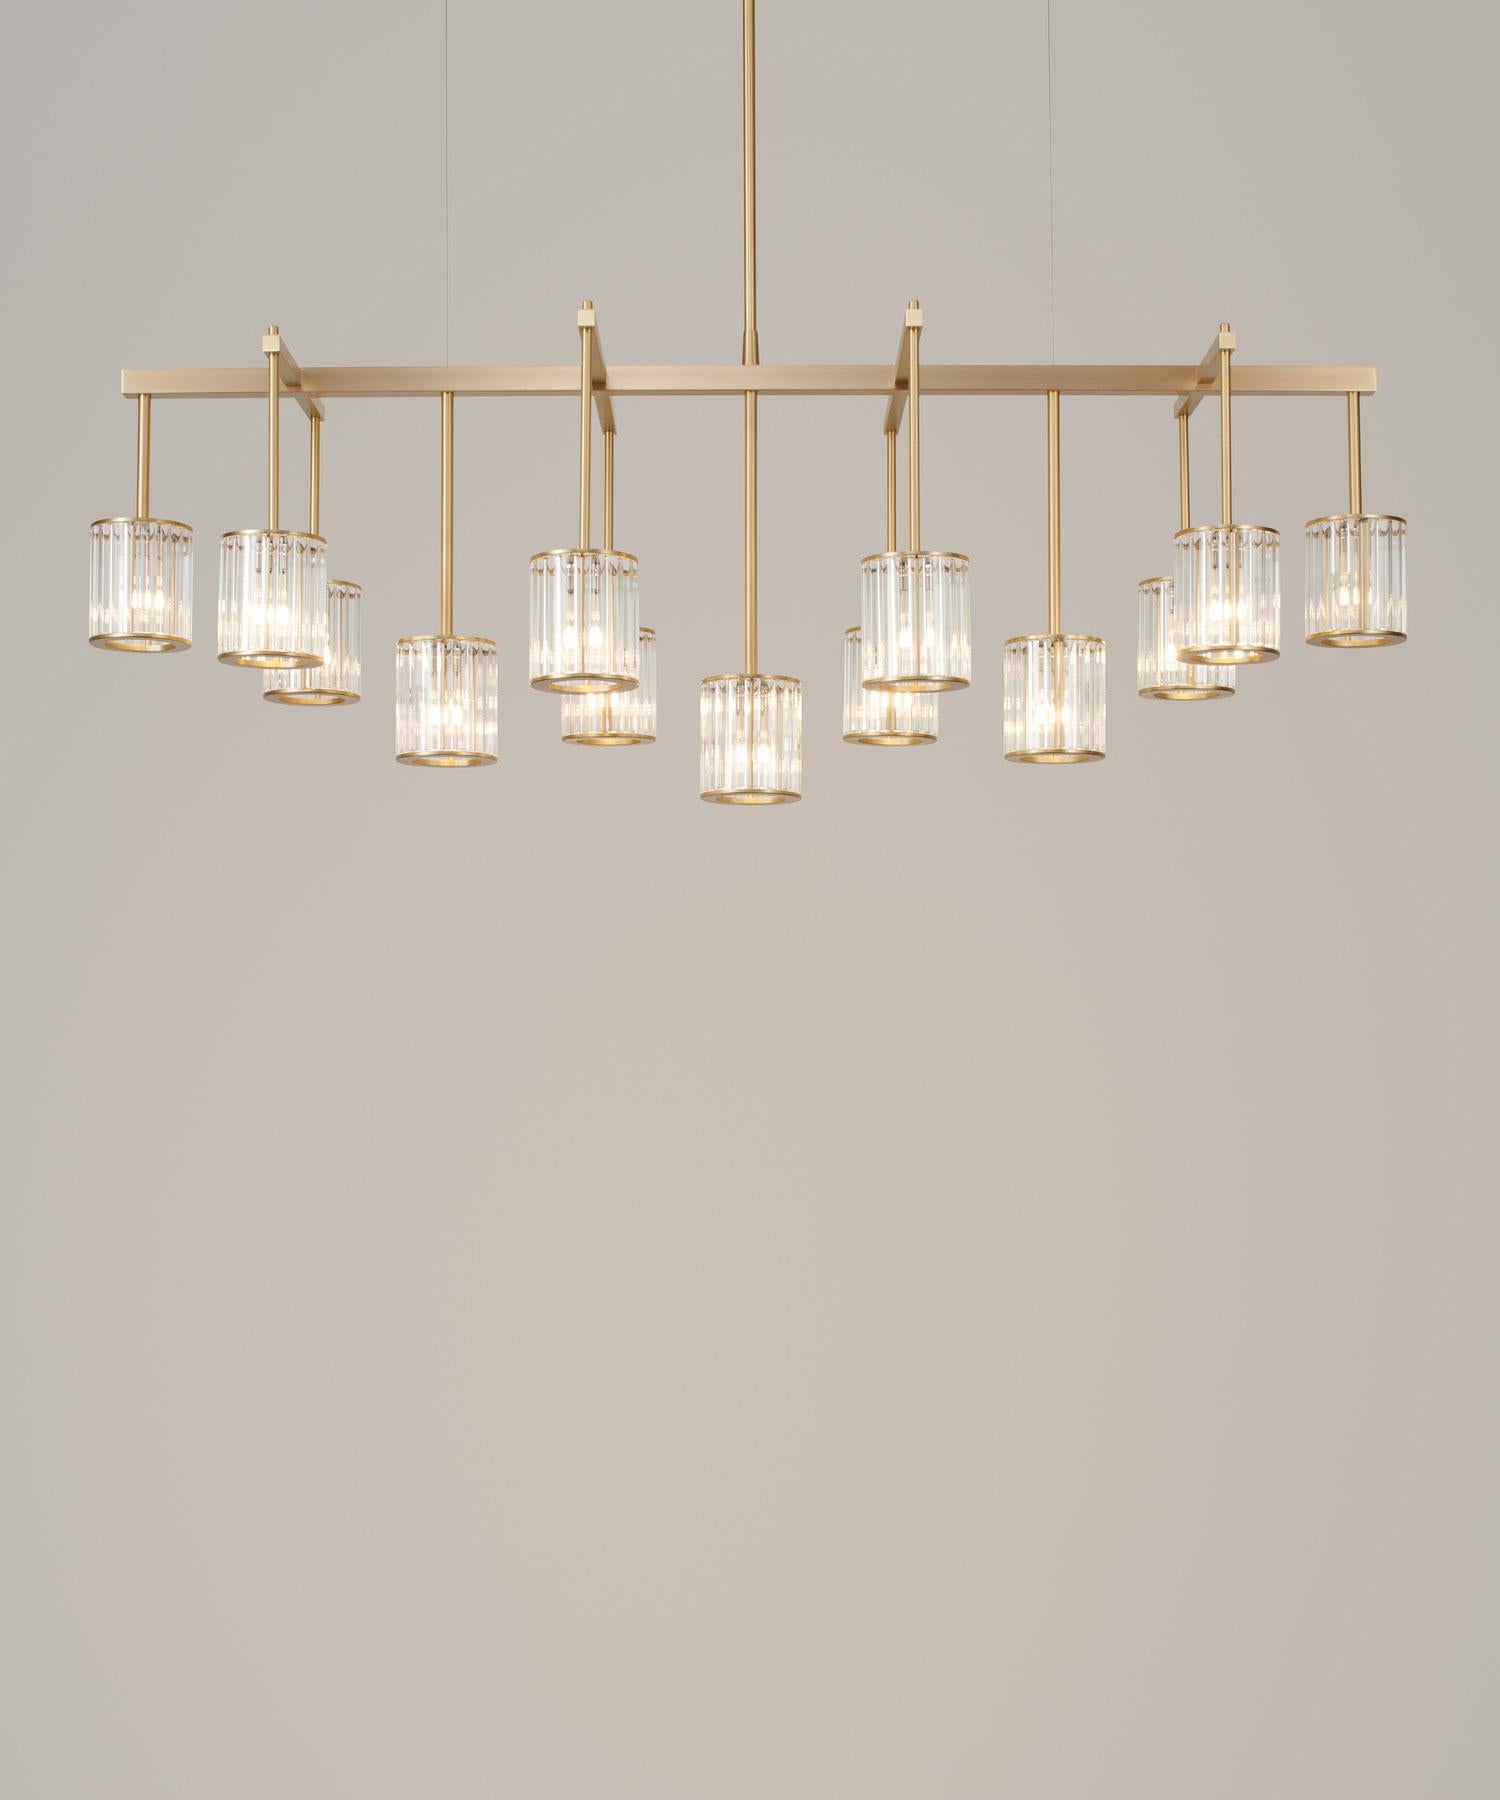 Flute Beam Chandelier with 13 Arms in Brushed Brass and Smoke Glass Diffusers For Sale 3